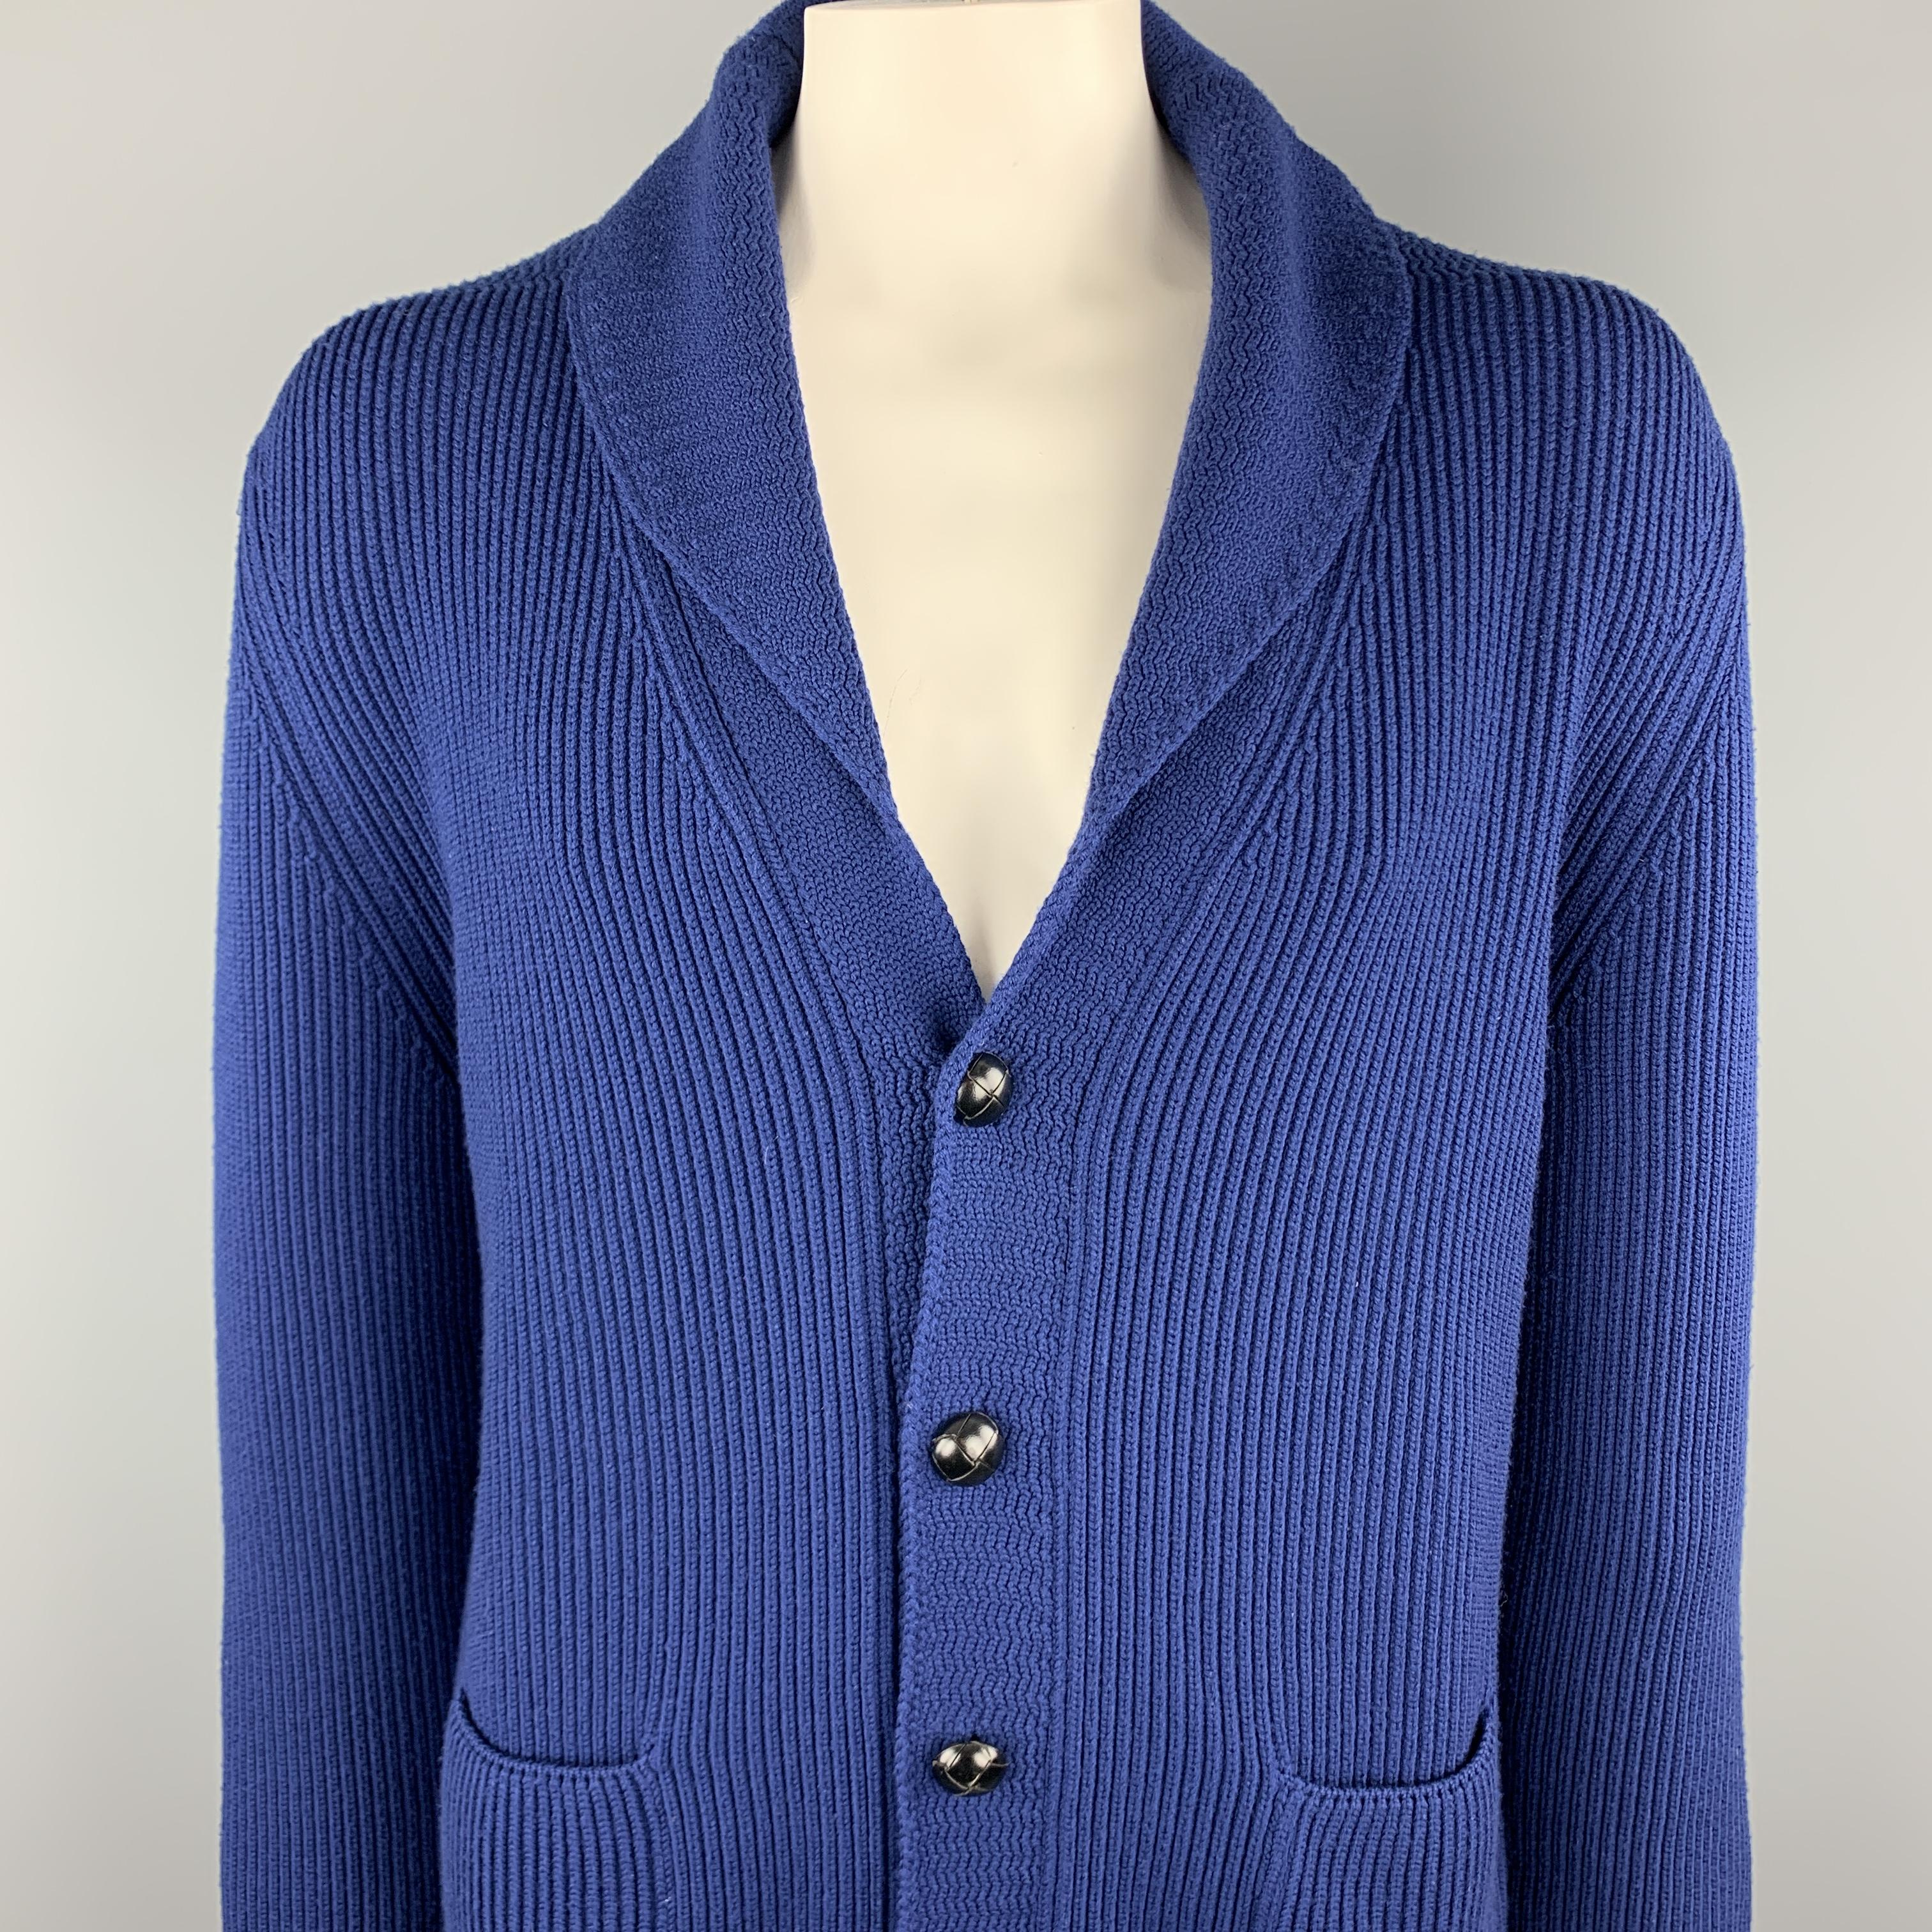 TOM FORD cardigan comes in a navy knitted merino wool featuring a shawl collar, patch pockets, and a buttoned closure. Made in Italy. 

Excellent Pre-Owned Condition.
Marked: IT 56

Measurements:

Shoulder: 22 in.
Chest: 48 in. 
Sleeve: 33.5 in.